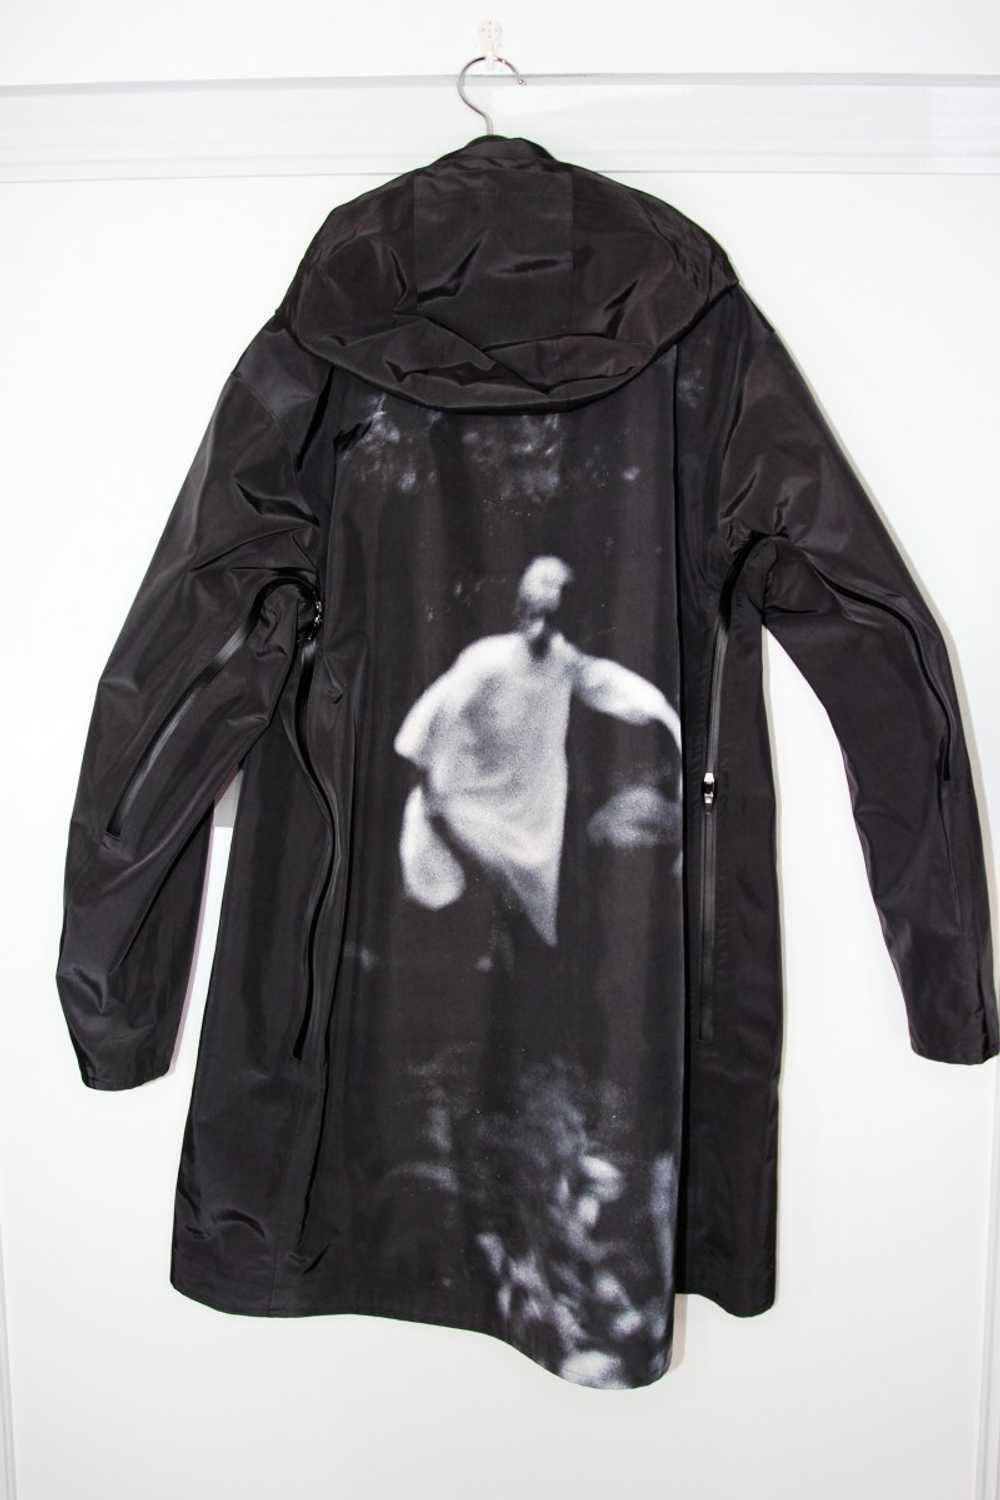 BNWT SS20 UNDERCOVER CINDY SHERMAN PARKA COAT 3 - image 3